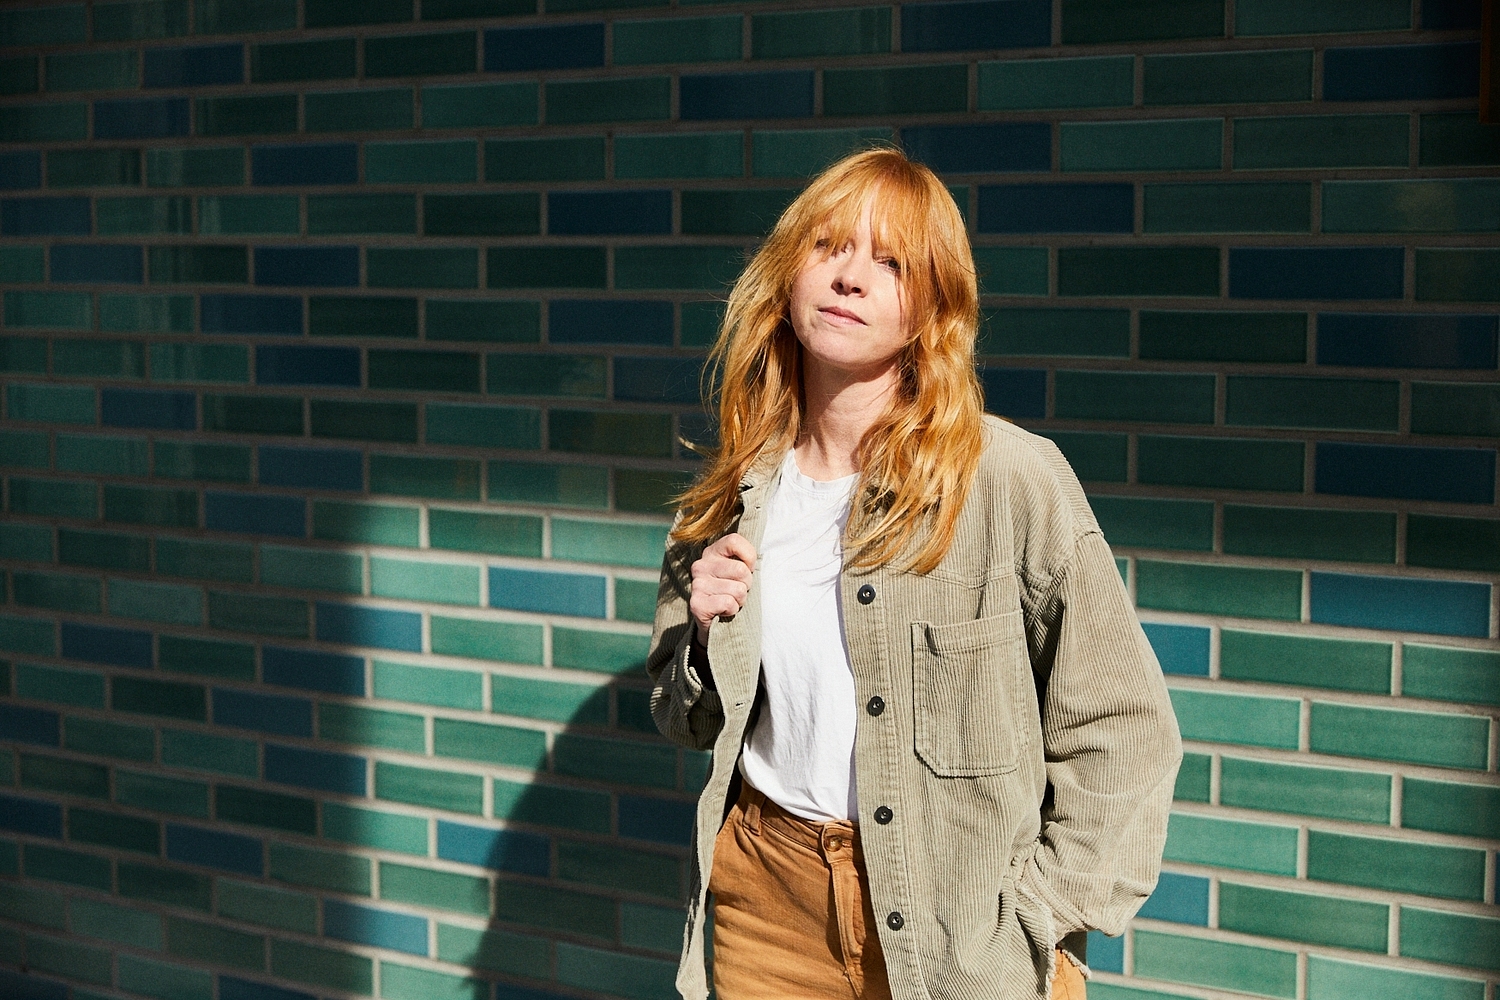 Lucy Rose and Kwes on the making of her triumphant new album ‘This Ain’t The Way You Go Out’